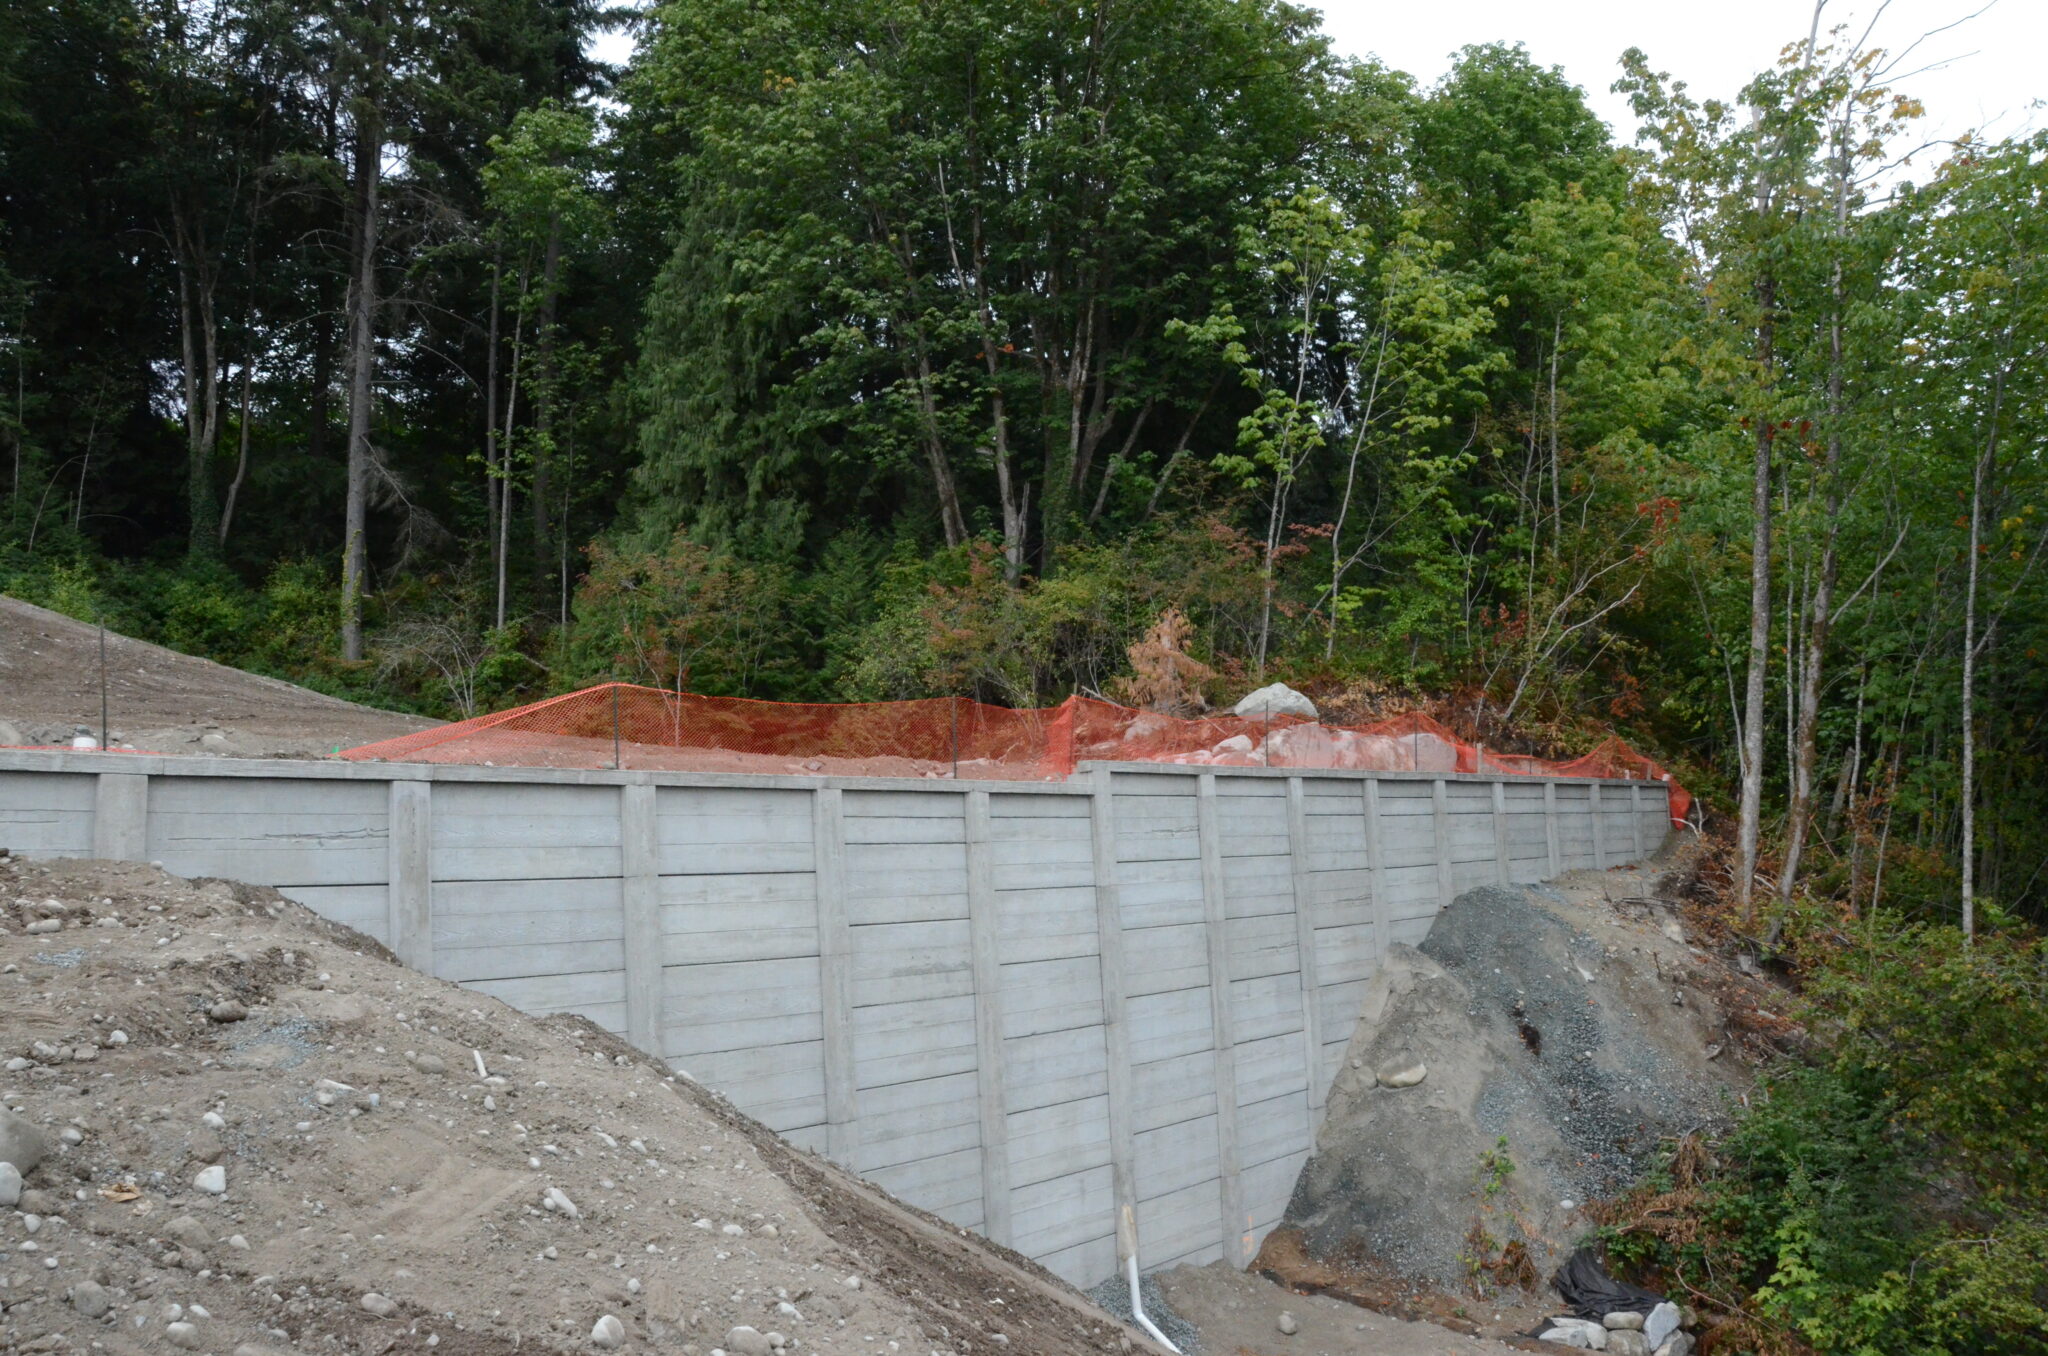 Retaining Wall Built To Allow For More Homes To Be Built In Development